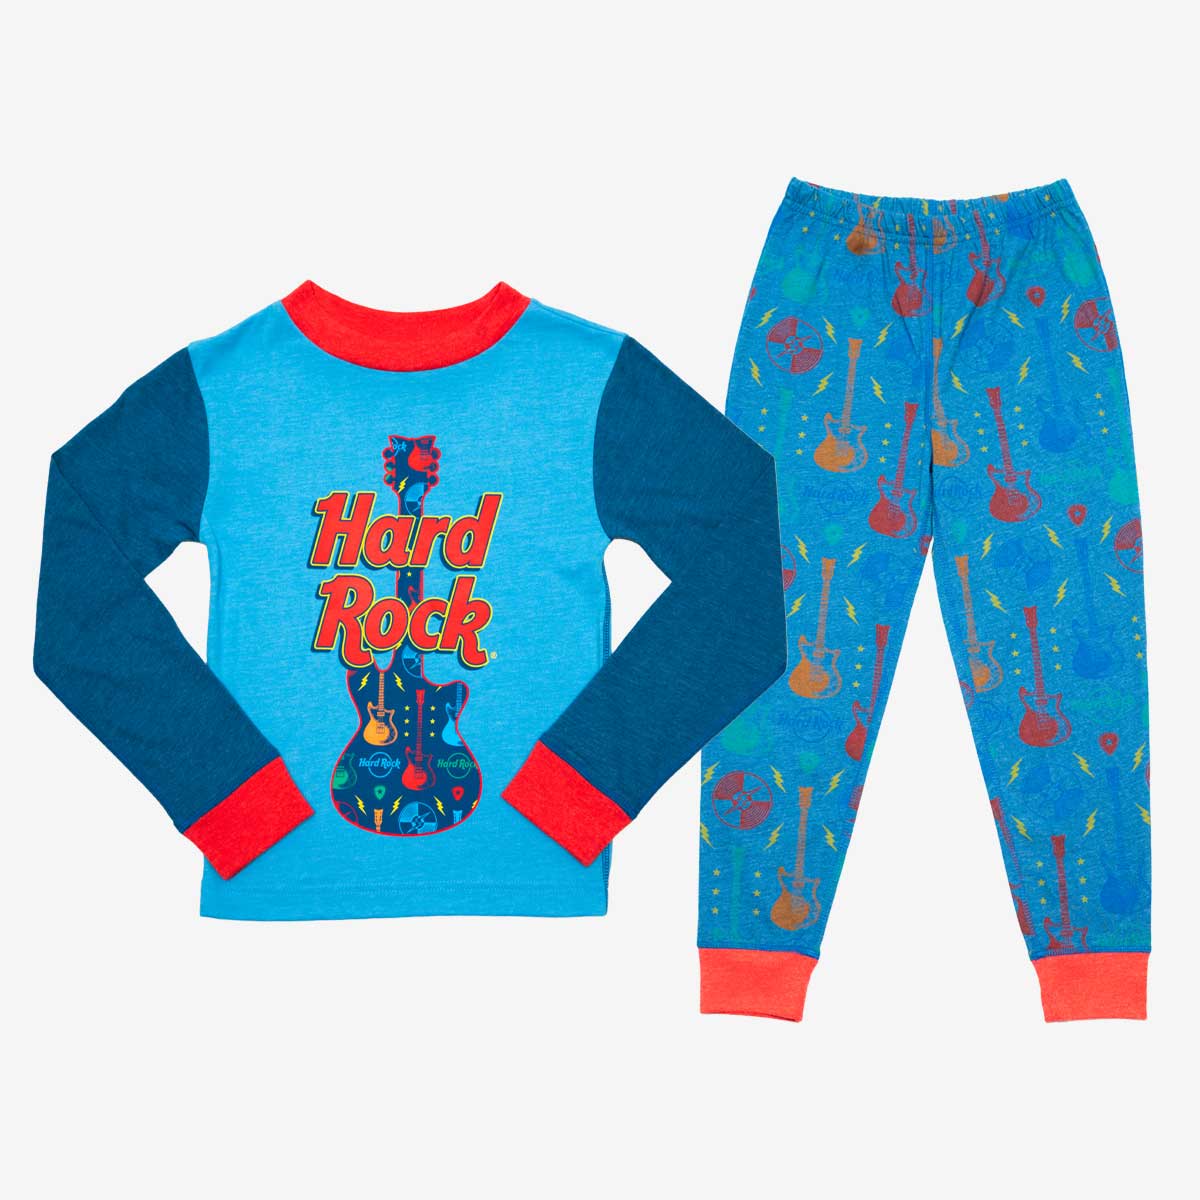 Cozy Holiday Youth Pajama Set in Blue Guitars Print image number 1